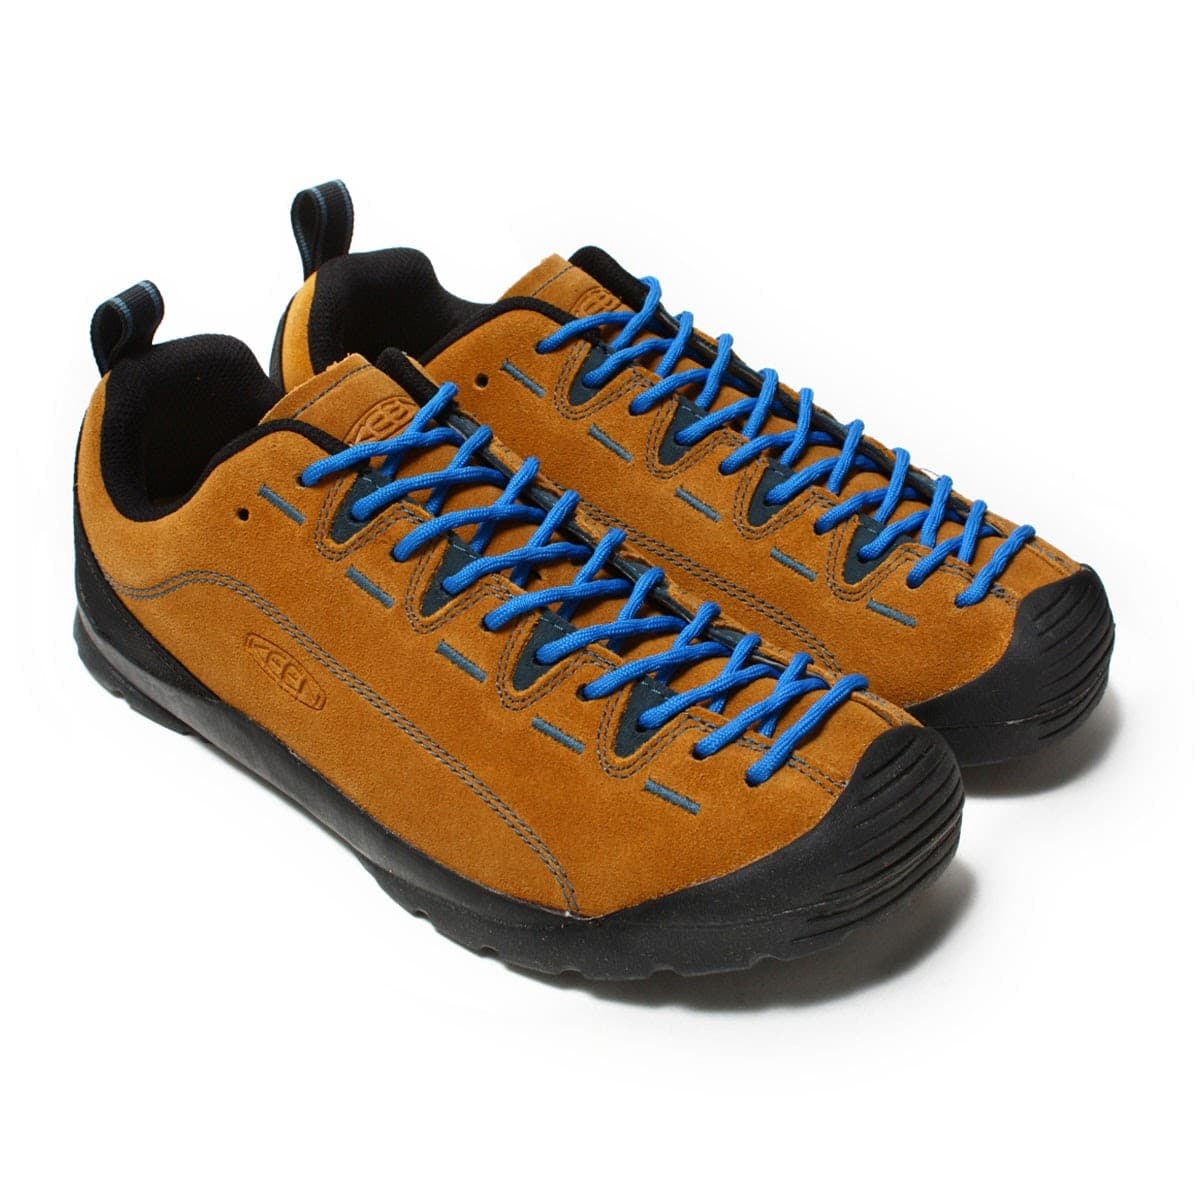 KEEN JASPER M CATHAY SPICE/ORION BLUE